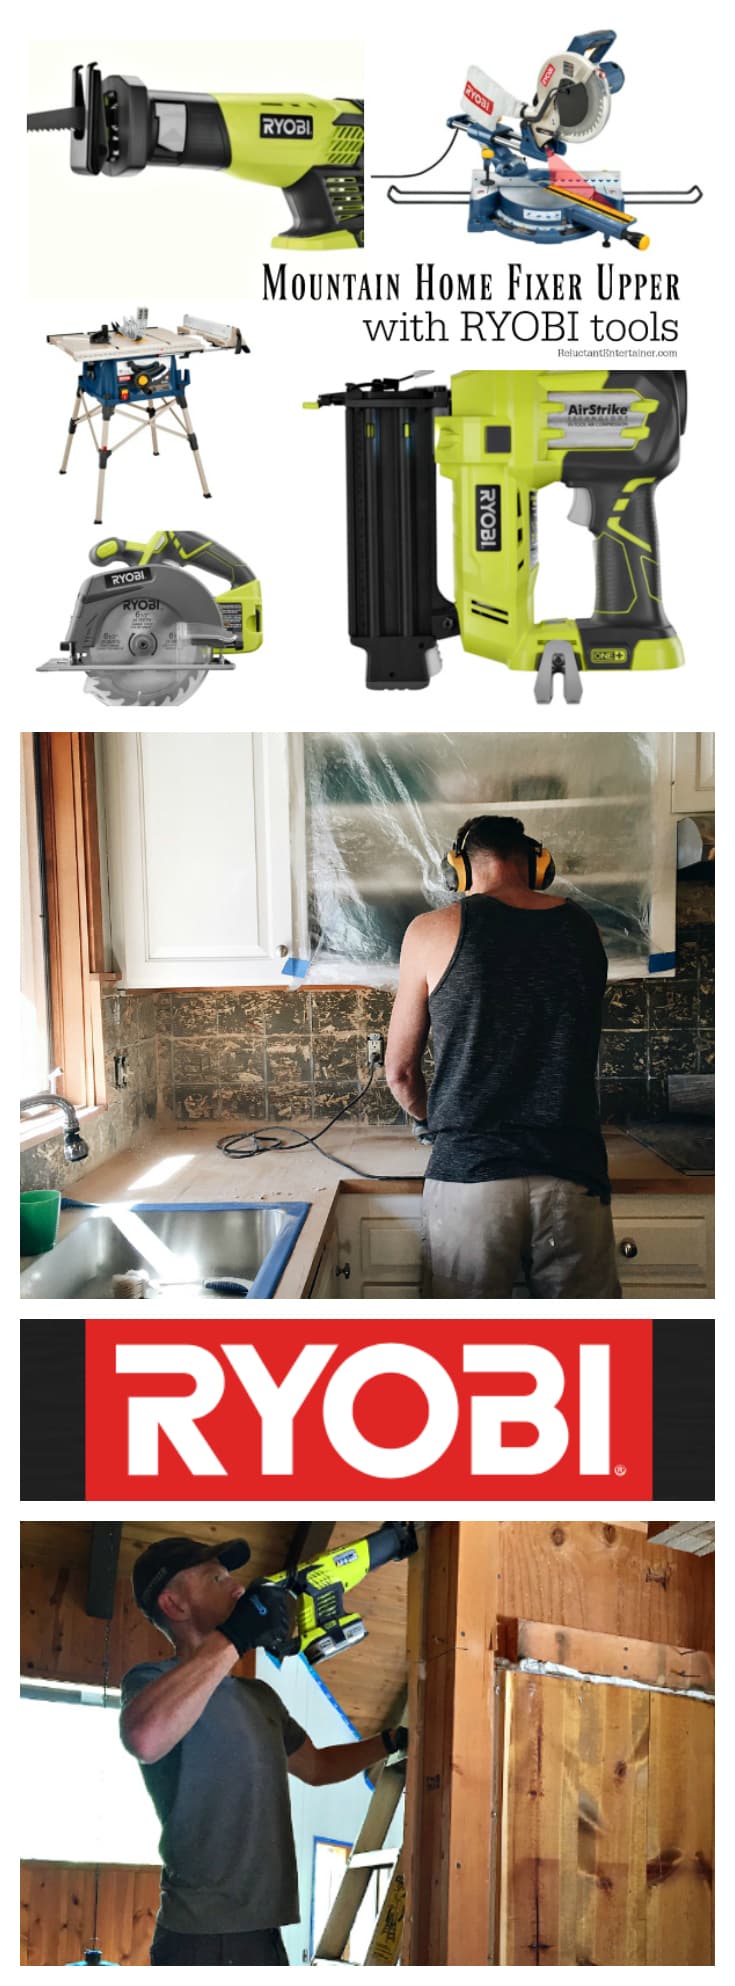 Mountain Home Fixer Upper with Ryobi Tools at ReluctantEntertainer.com